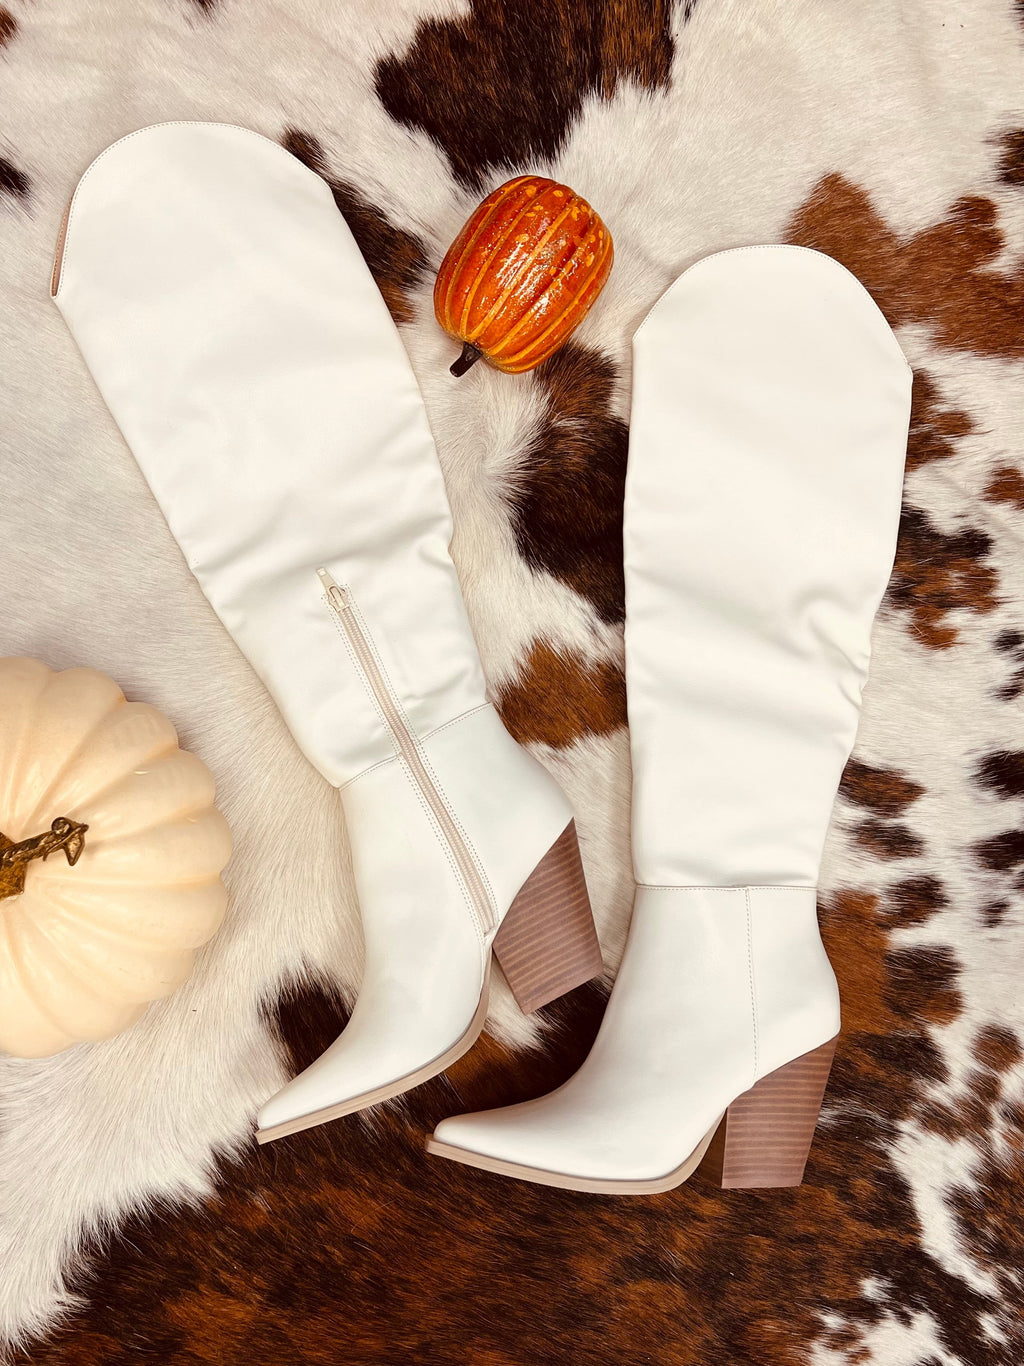 Let the lights dim and show off your style in these knee-high, white embroidered stitched cowboy boots. The 3.5" heel and 15.75" in total height give you the perfect mix of comfort and class - now all you need is somewhere to dance the night away!  These boots run small so I would size up!!